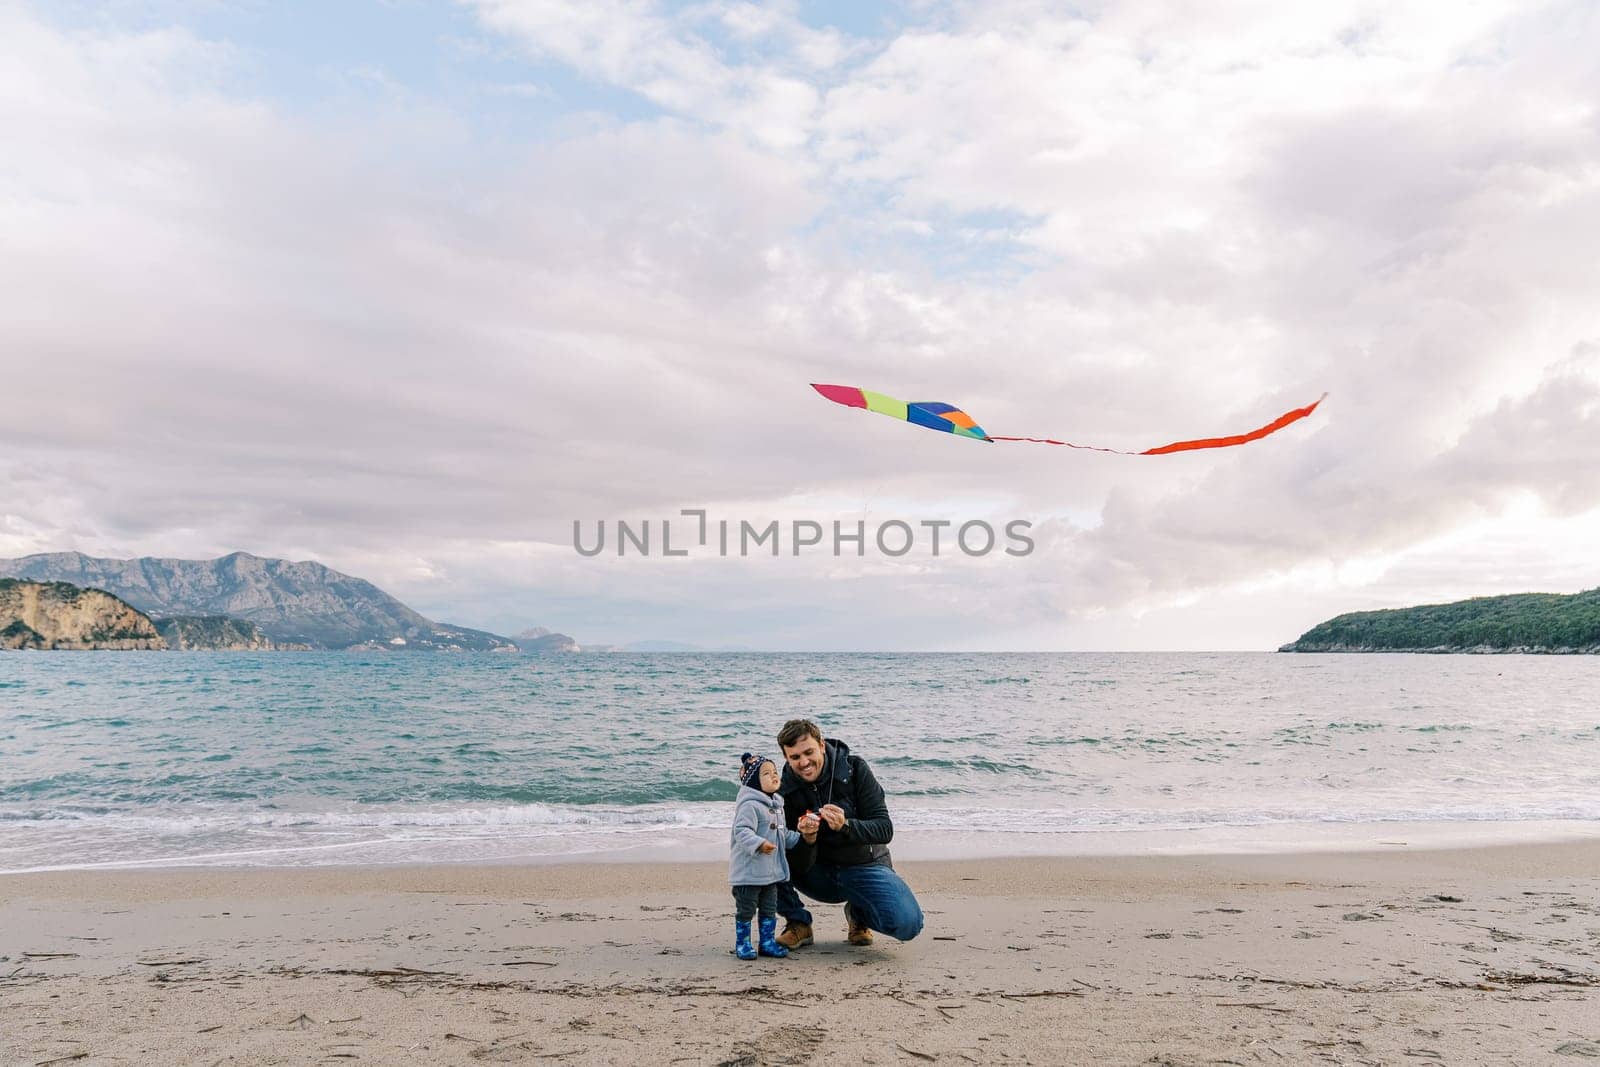 Dad, squatting down, launches a colorful kite by the sea with a little girl. High quality photo